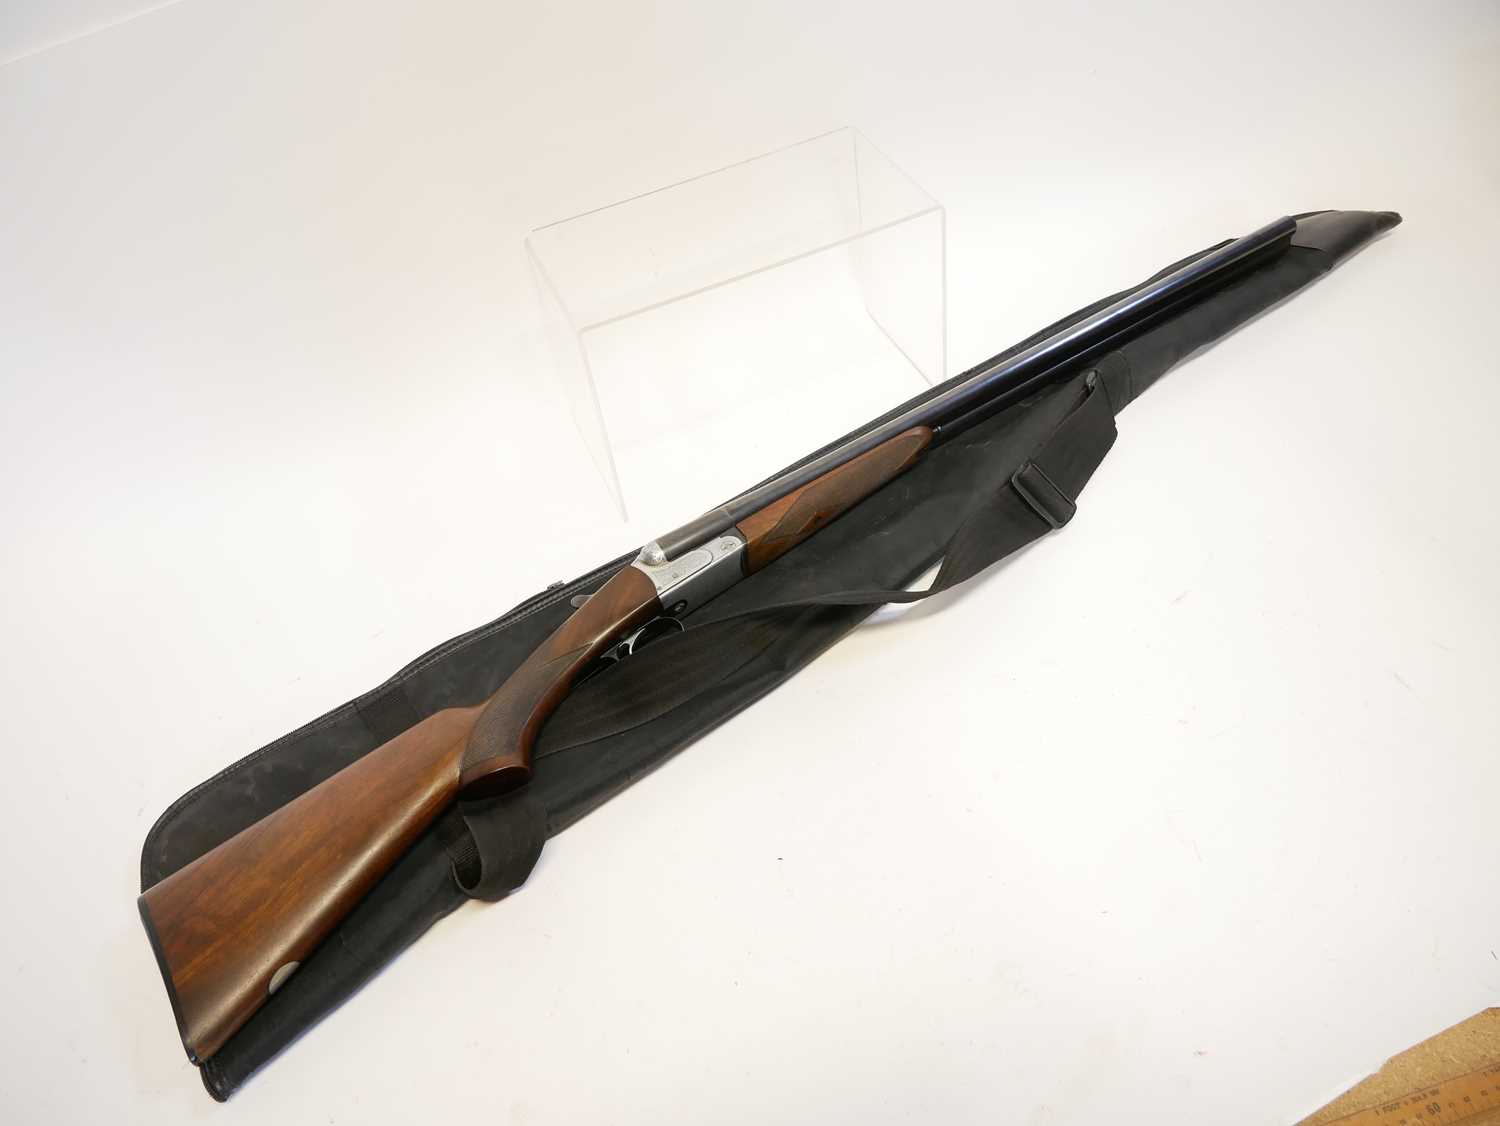 Beretta 12 bore side by side Model 626E shotgun, serial number A40366A, 28inch barrels with half and - Image 14 of 15